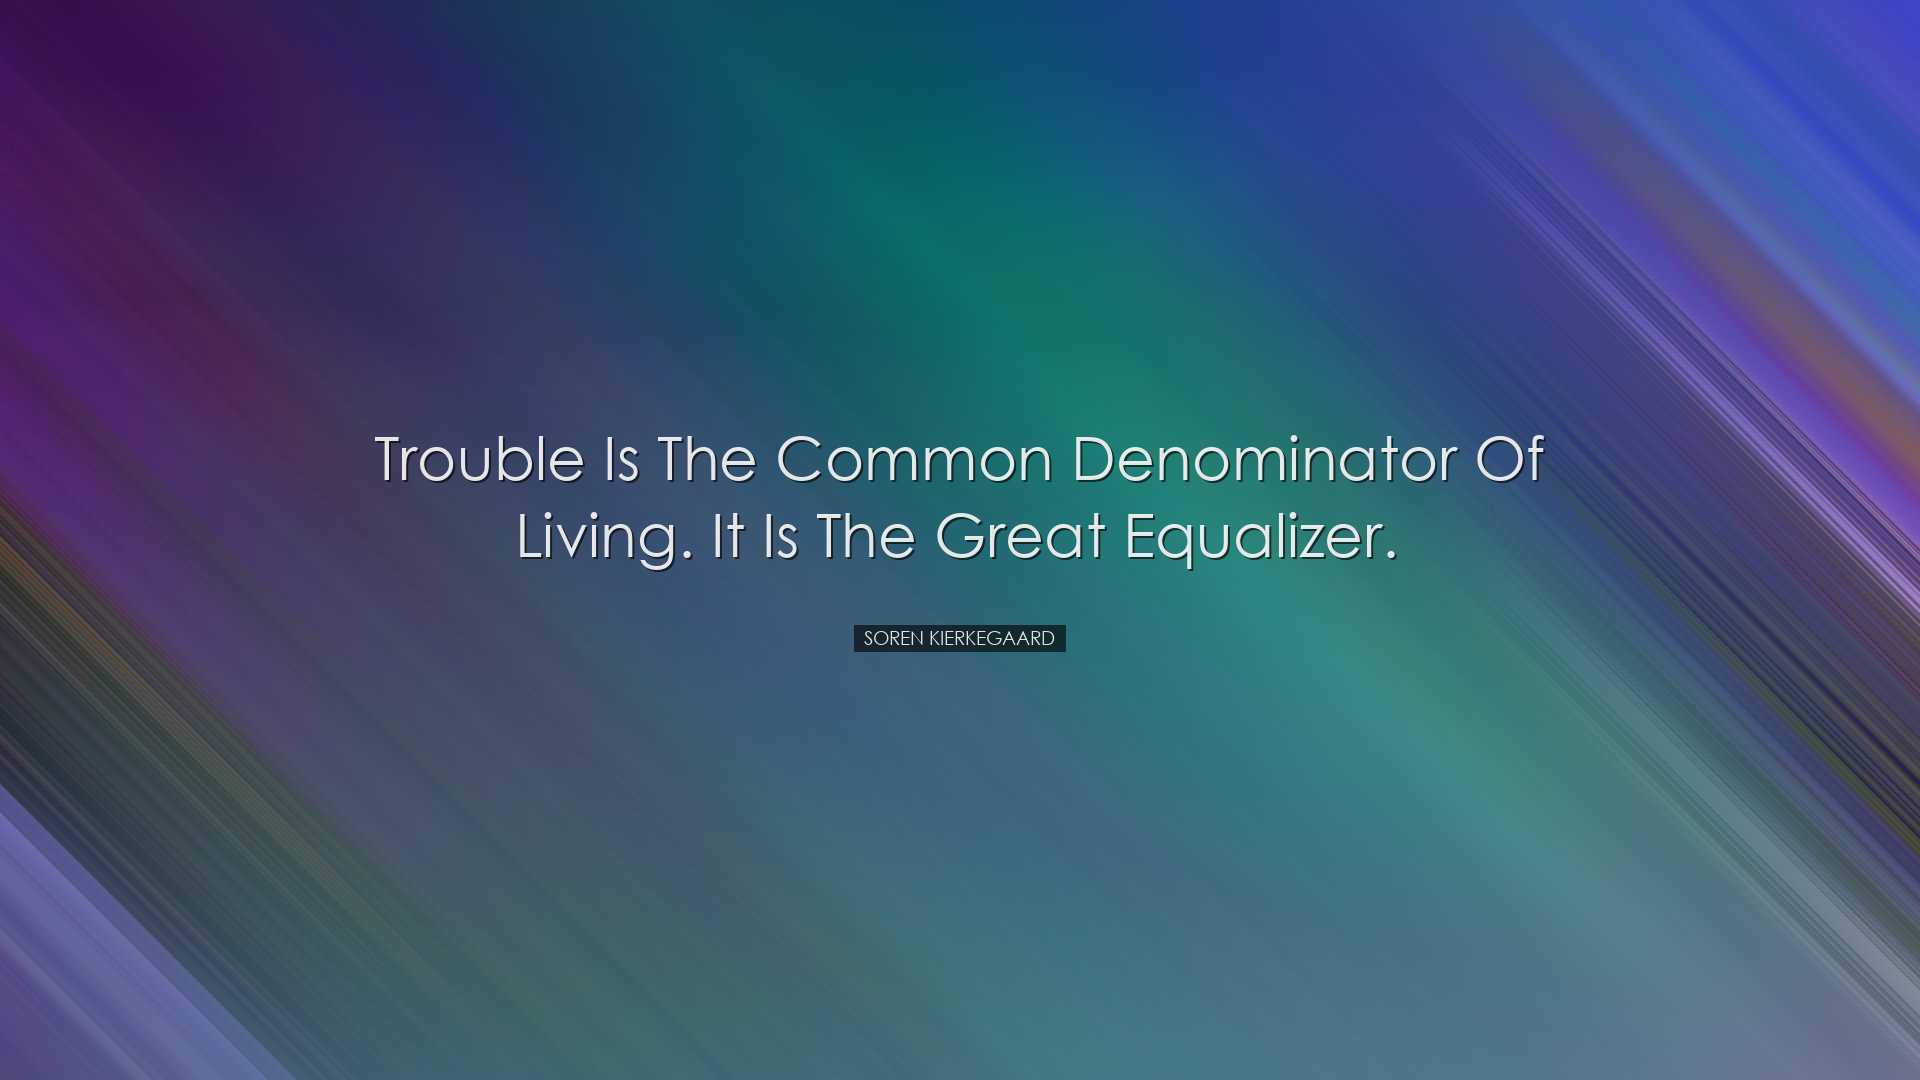 Trouble is the common denominator of living. It is the great equal